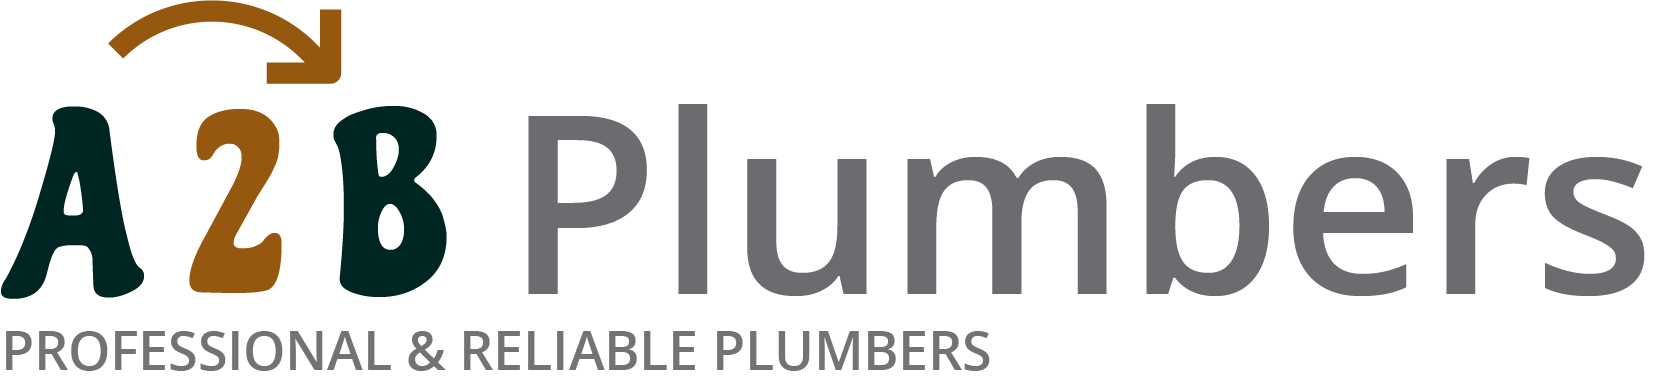 If you need a boiler installed, a radiator repaired or a leaking tap fixed, call us now - we provide services for properties in Aylesbury and the local area.